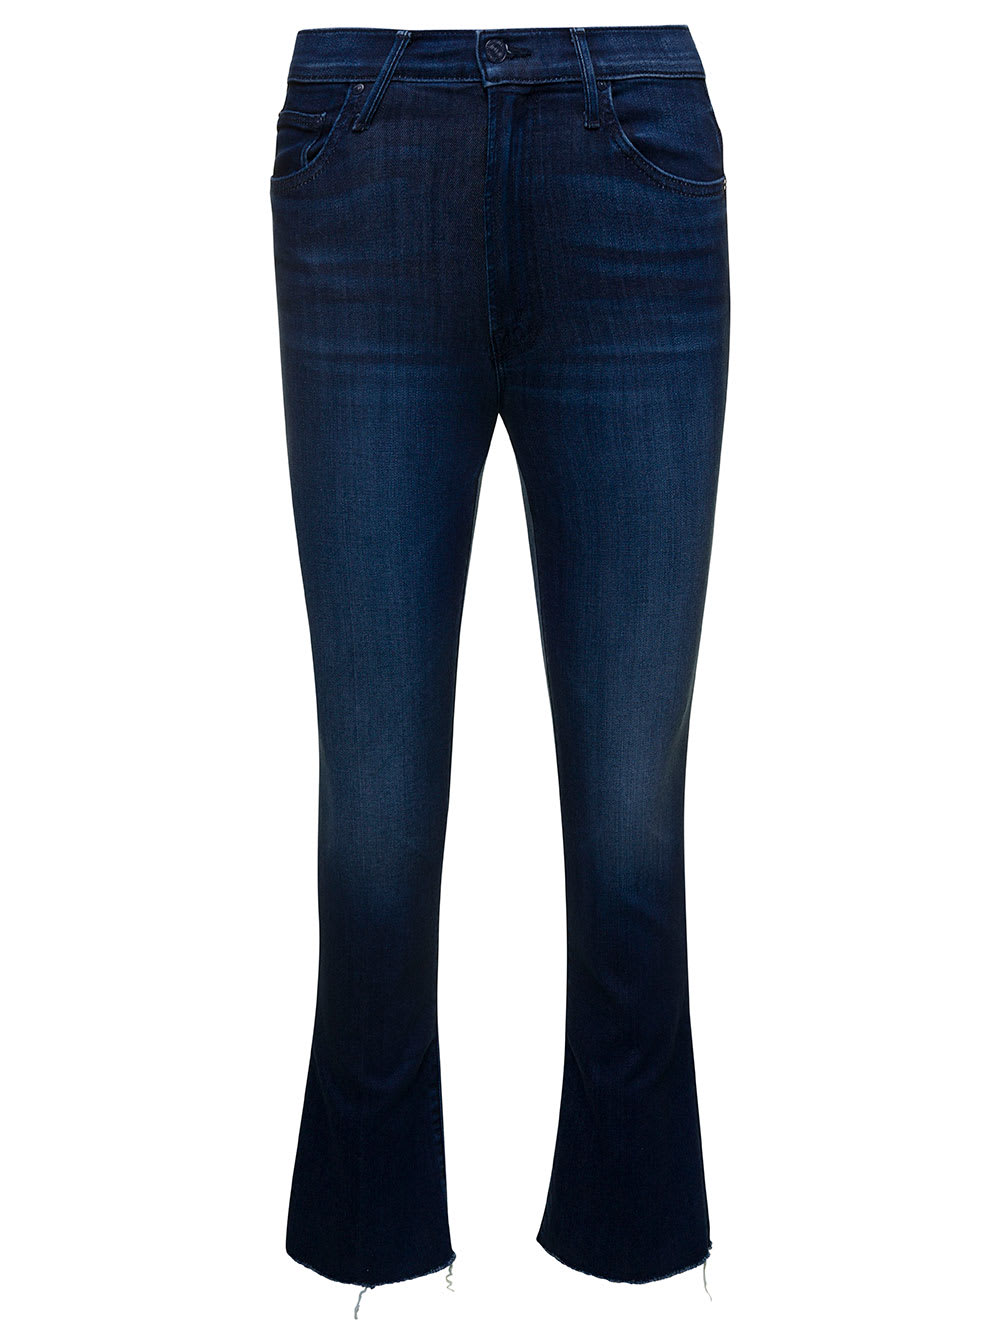 MOTHER THE INSIDER BLUE JEANS WITH LIGHTLY FLARED LEG IN COTTON BLEND DENIM WOMAN